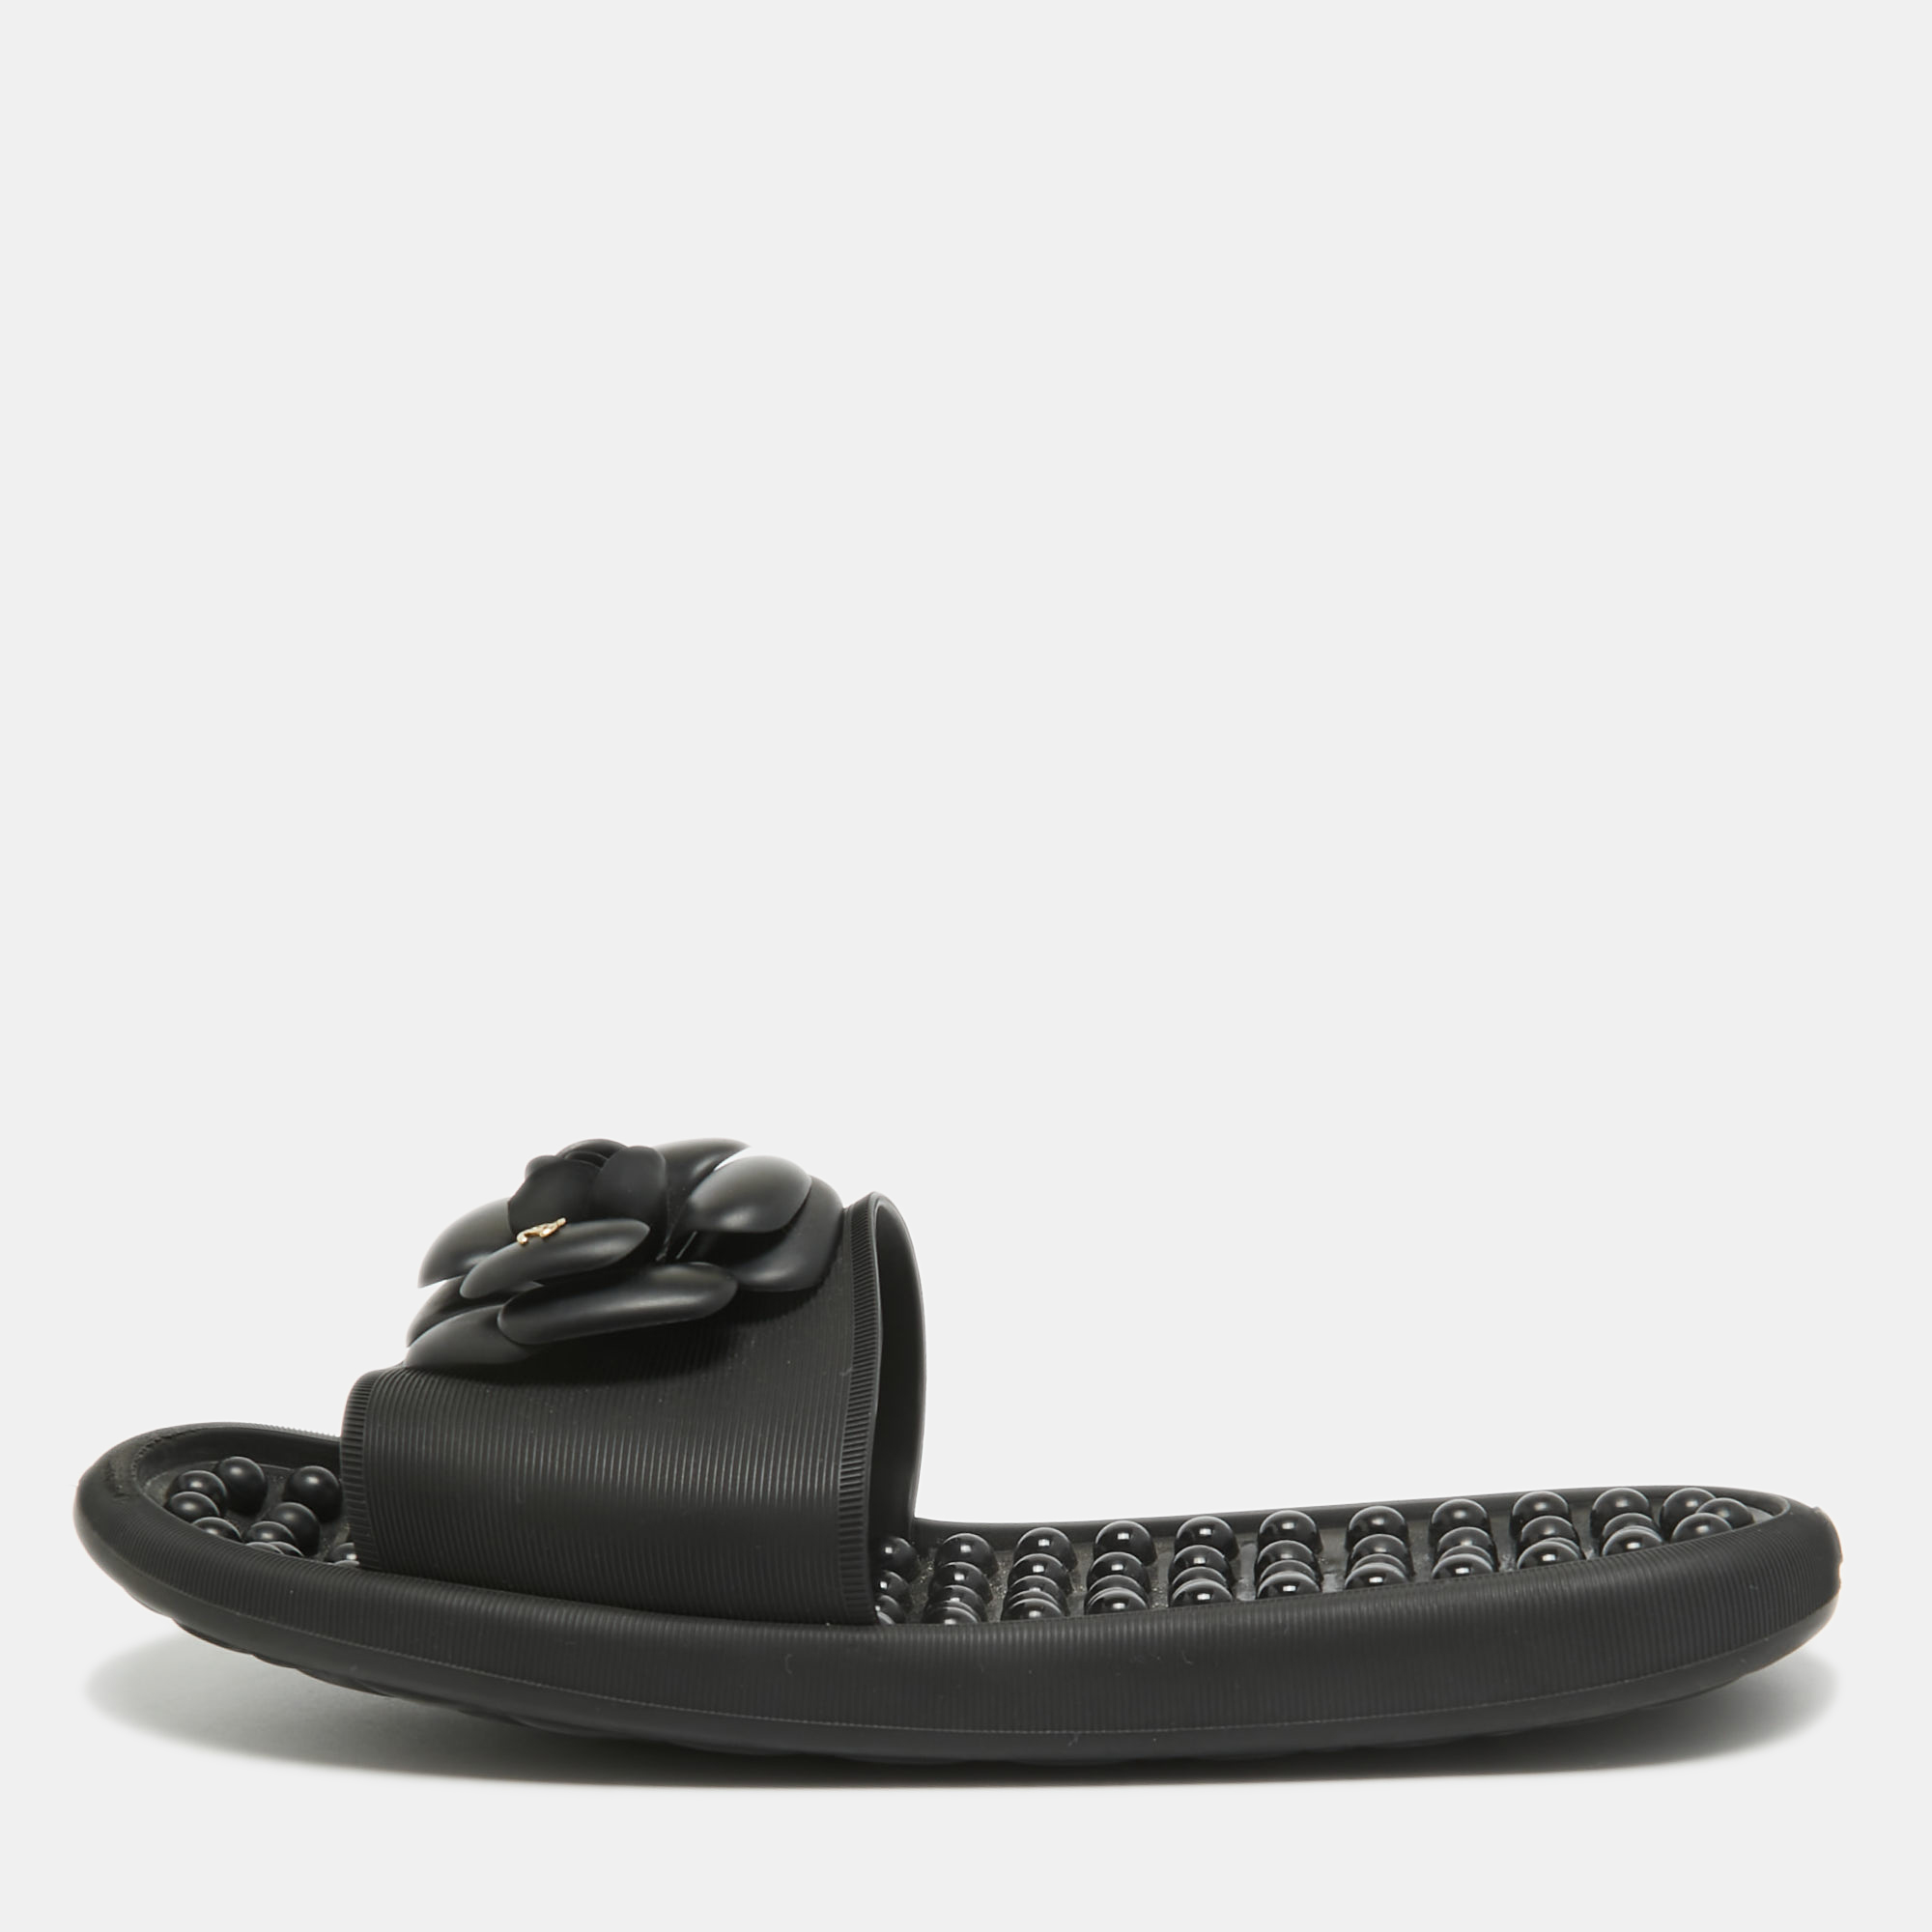 Pre-owned Chanel Black Textured Rubber Cc Camellia Slides Size 41